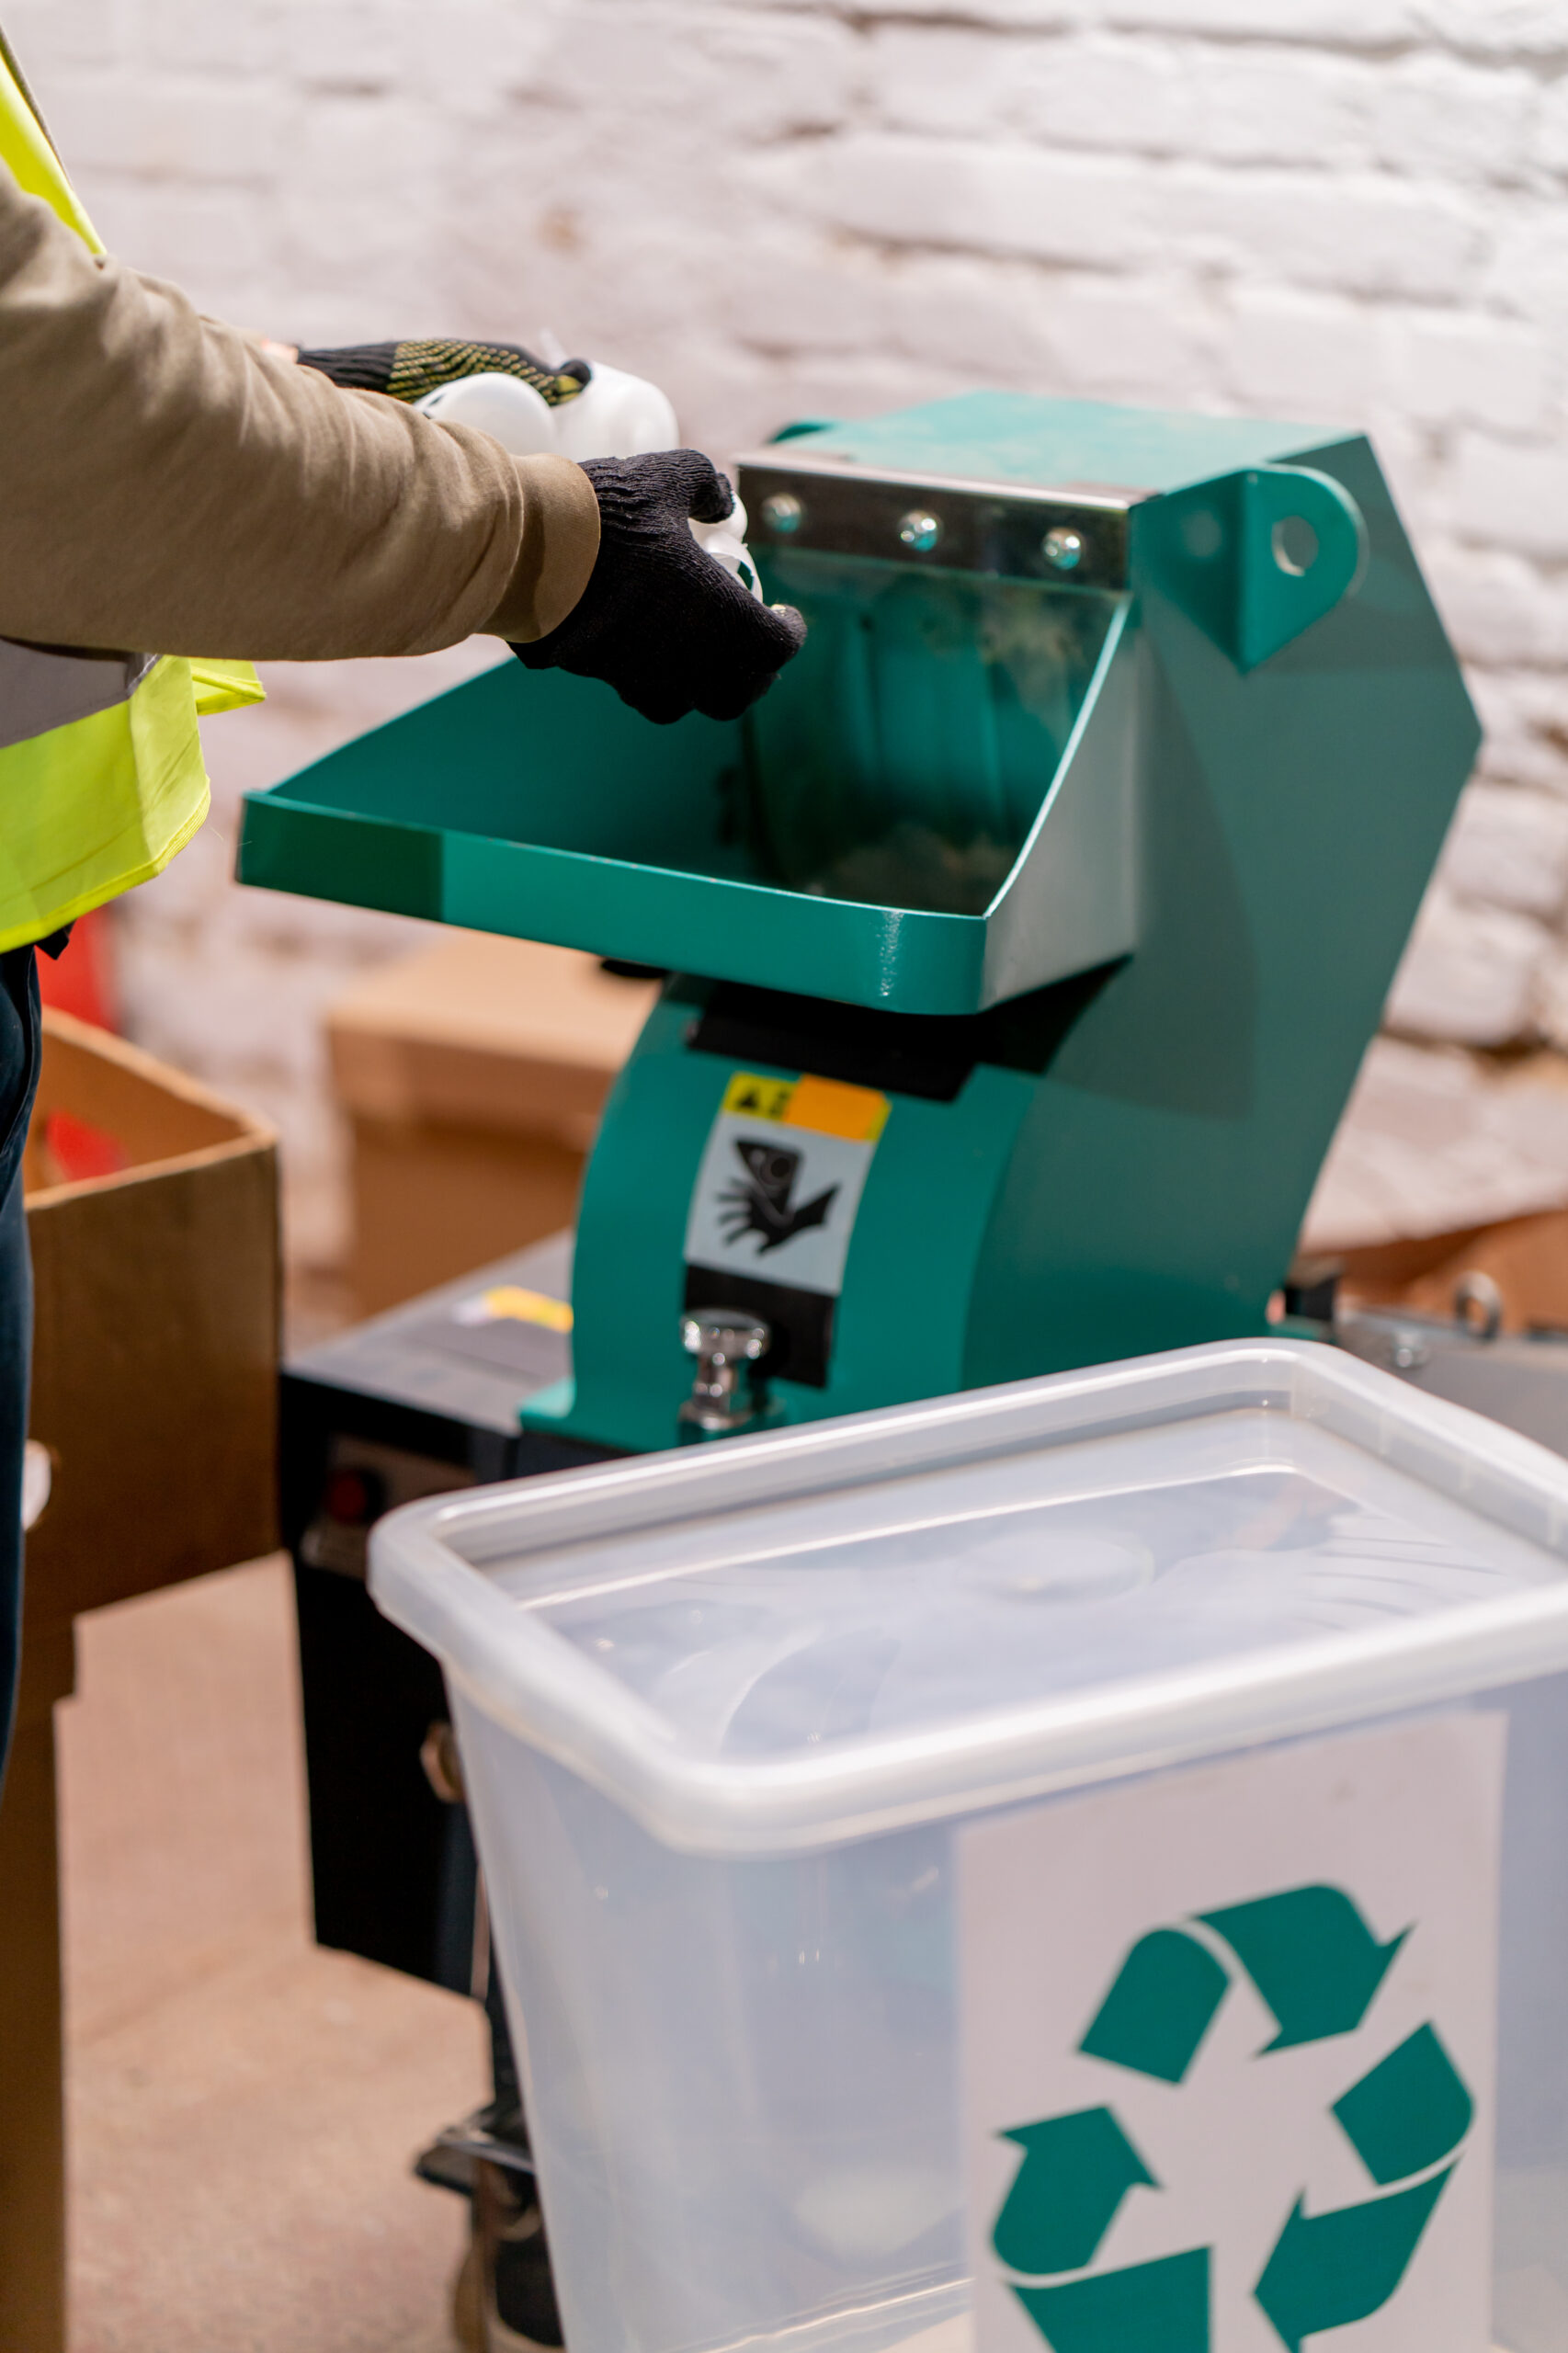 Close-up shot of male hands in gloves pouring plastic caps into a shredding apparatus for recycling